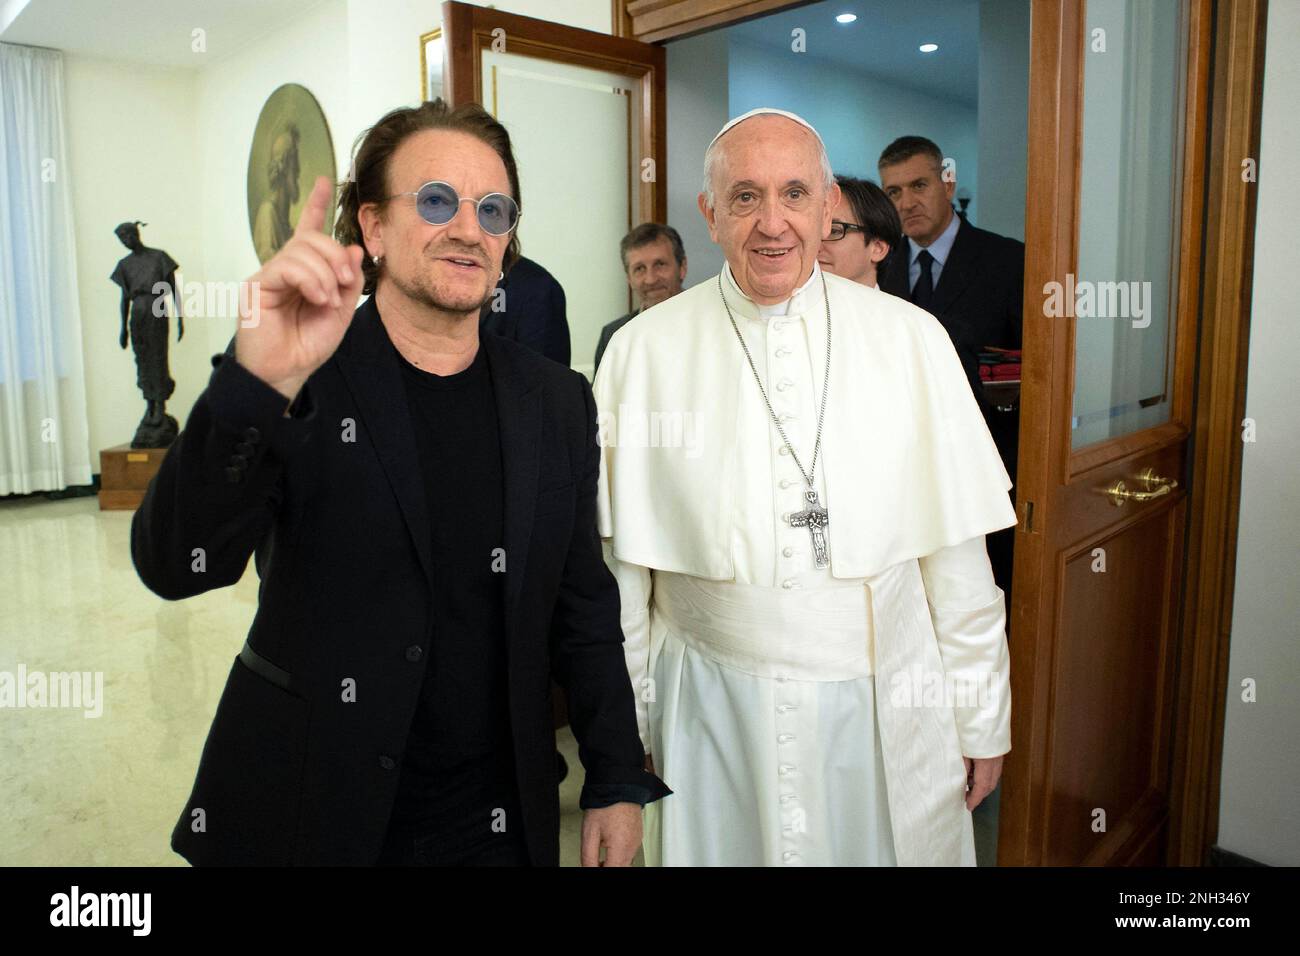 U2 front man Bono Vox meets pope Francis during a private audience at the Vatican on September 19, 2018. Bono said they ‘let the conversation go where it wanted to go,’ discussing ‘big themes,’ such as the future of commerce and how it might serve sustainable development goals. - Pope Francis will celebrate his 10th anniversary of pontificate on March 13. Photo by Eric Vandeville/ABACAPRESS.COM Stock Photo